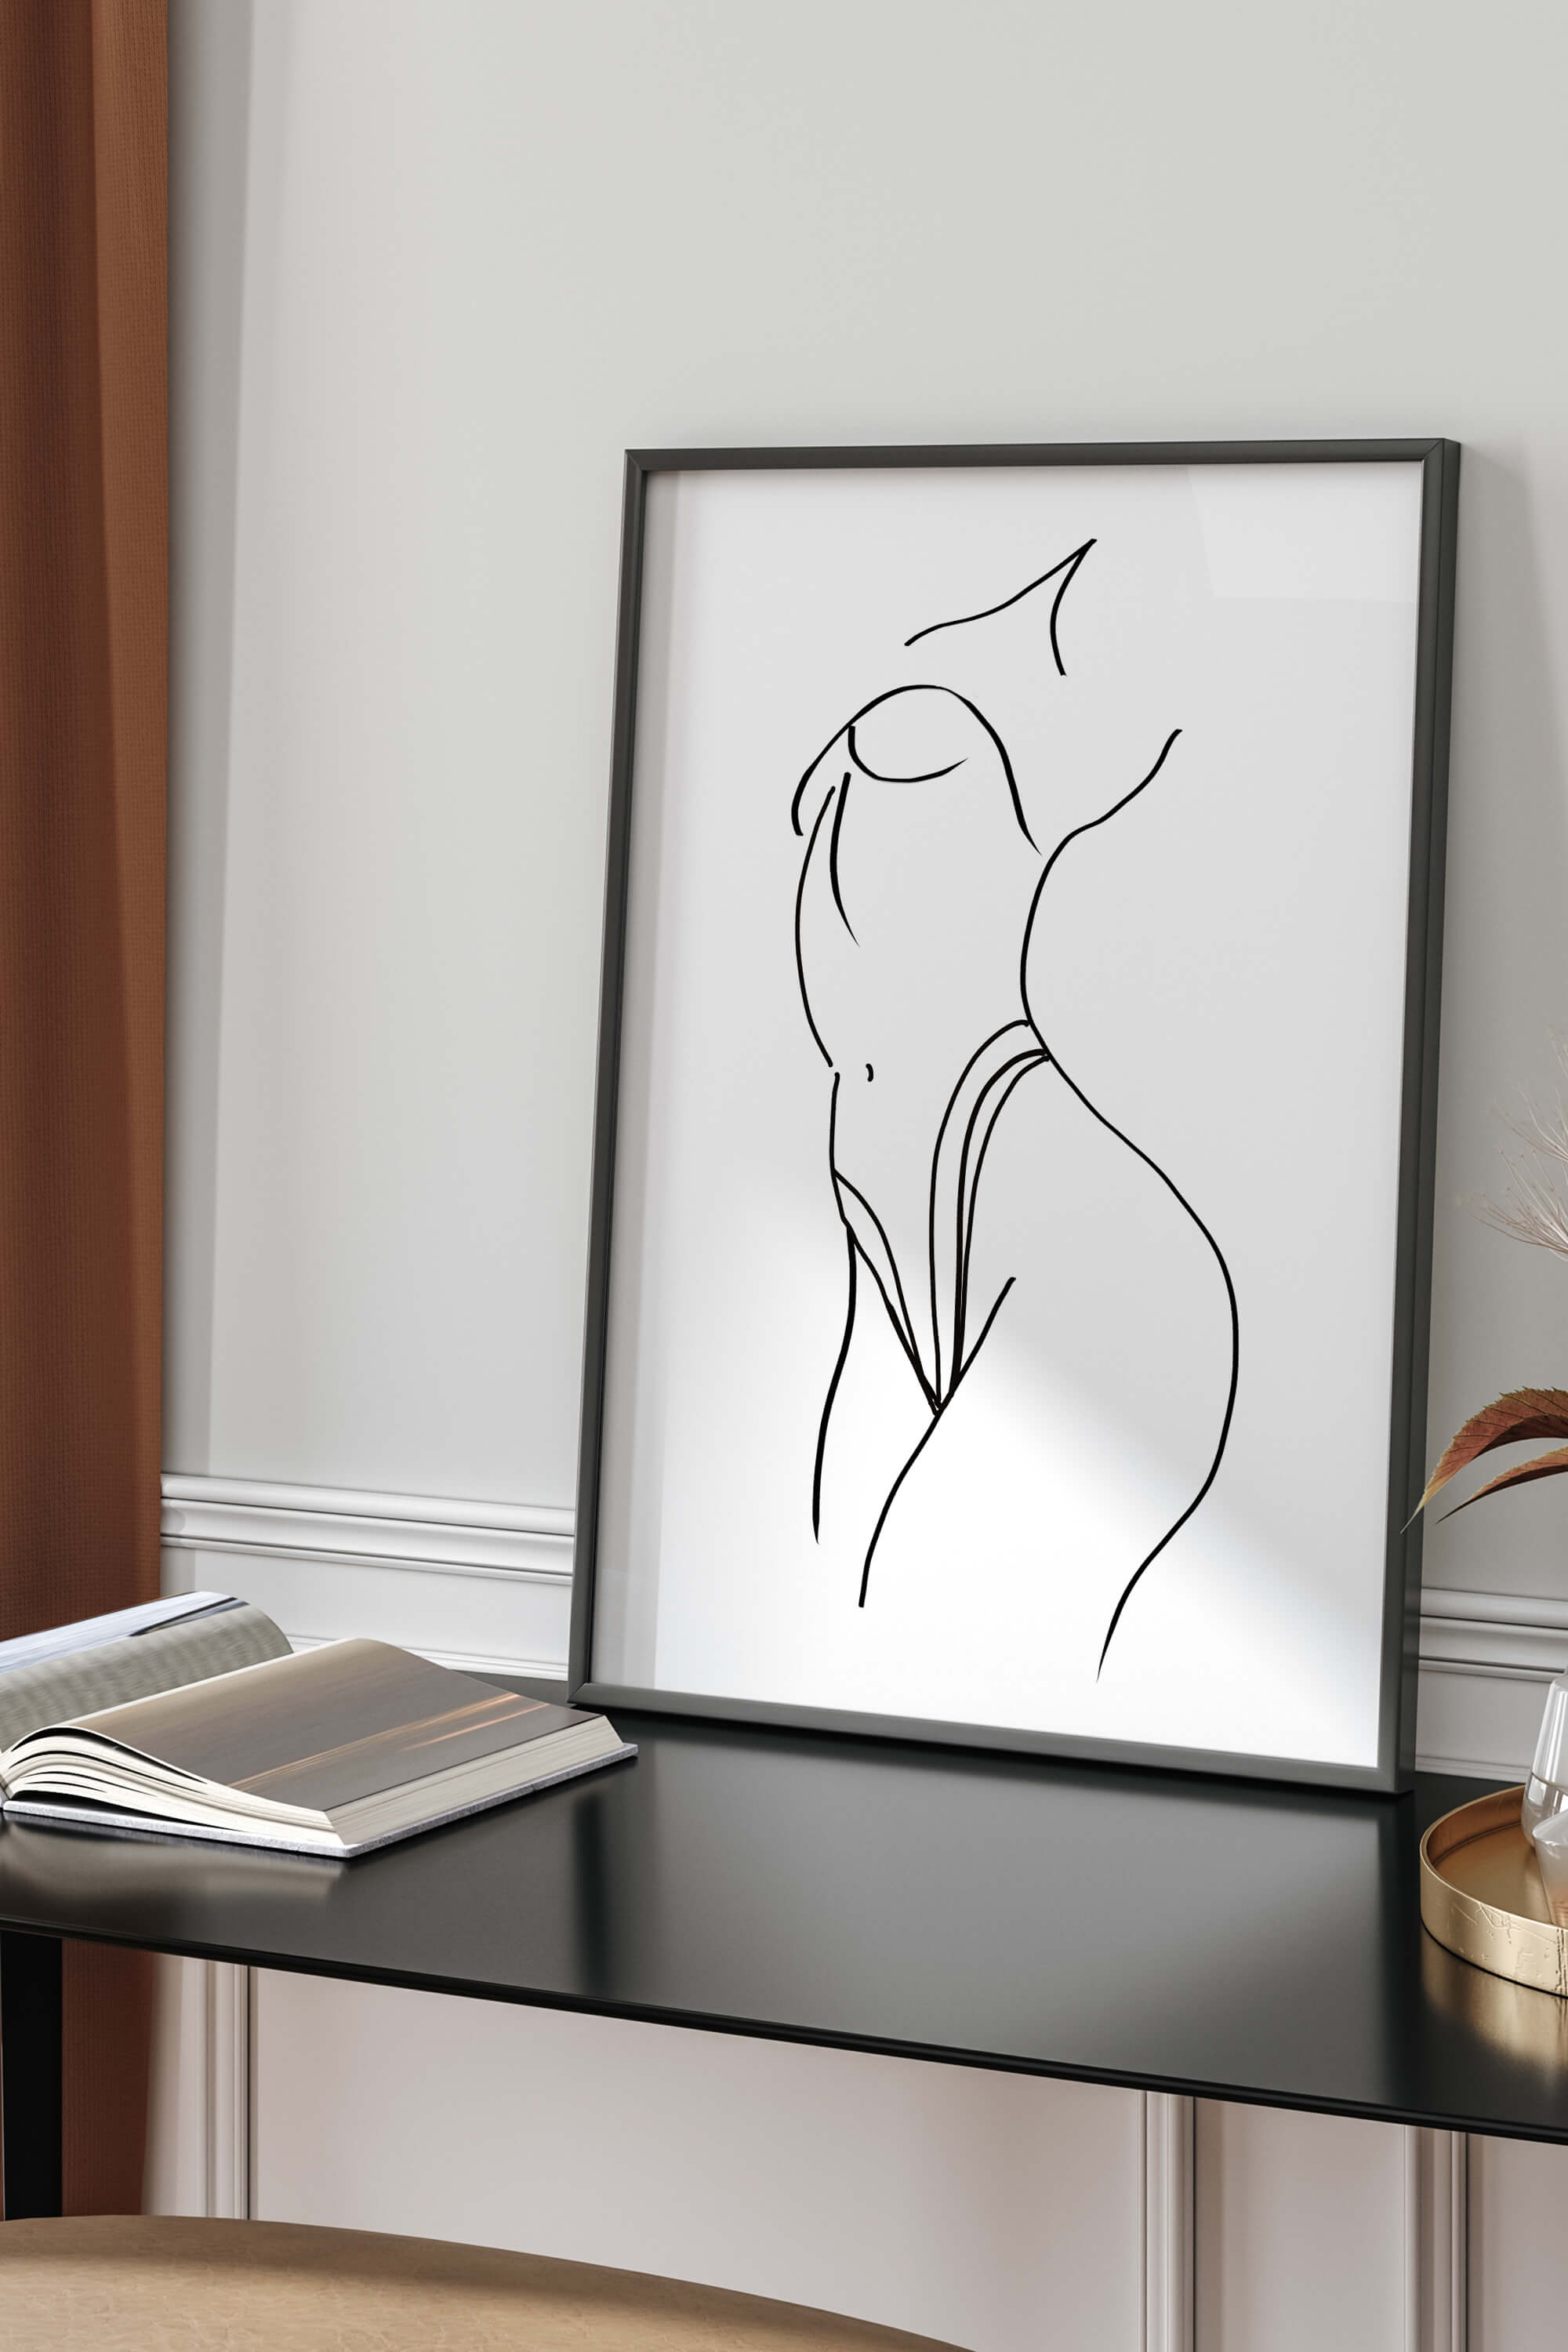 Abstract representation of female body poses in monochrome. The art print explores the boundaries of form and movement, making it a captivating piece for those interested in modern, abstract interpretations of the human body.